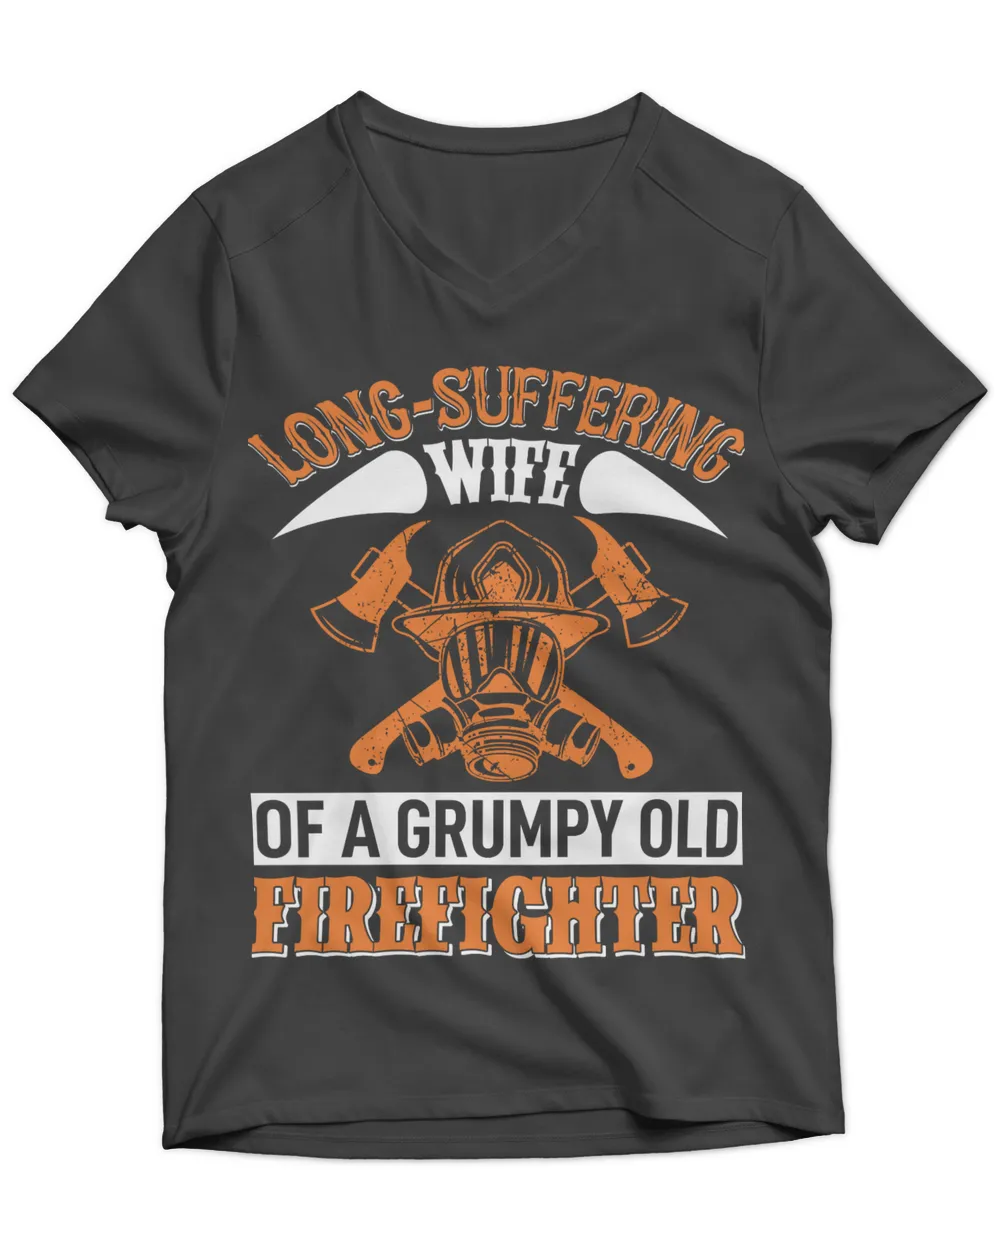 Firefighter T Shirt, Firefighter Hoodie, Firefighter Long Sleeved T-Shirt, V-Neck, Firefighter Shirts Funny Quotes (21)